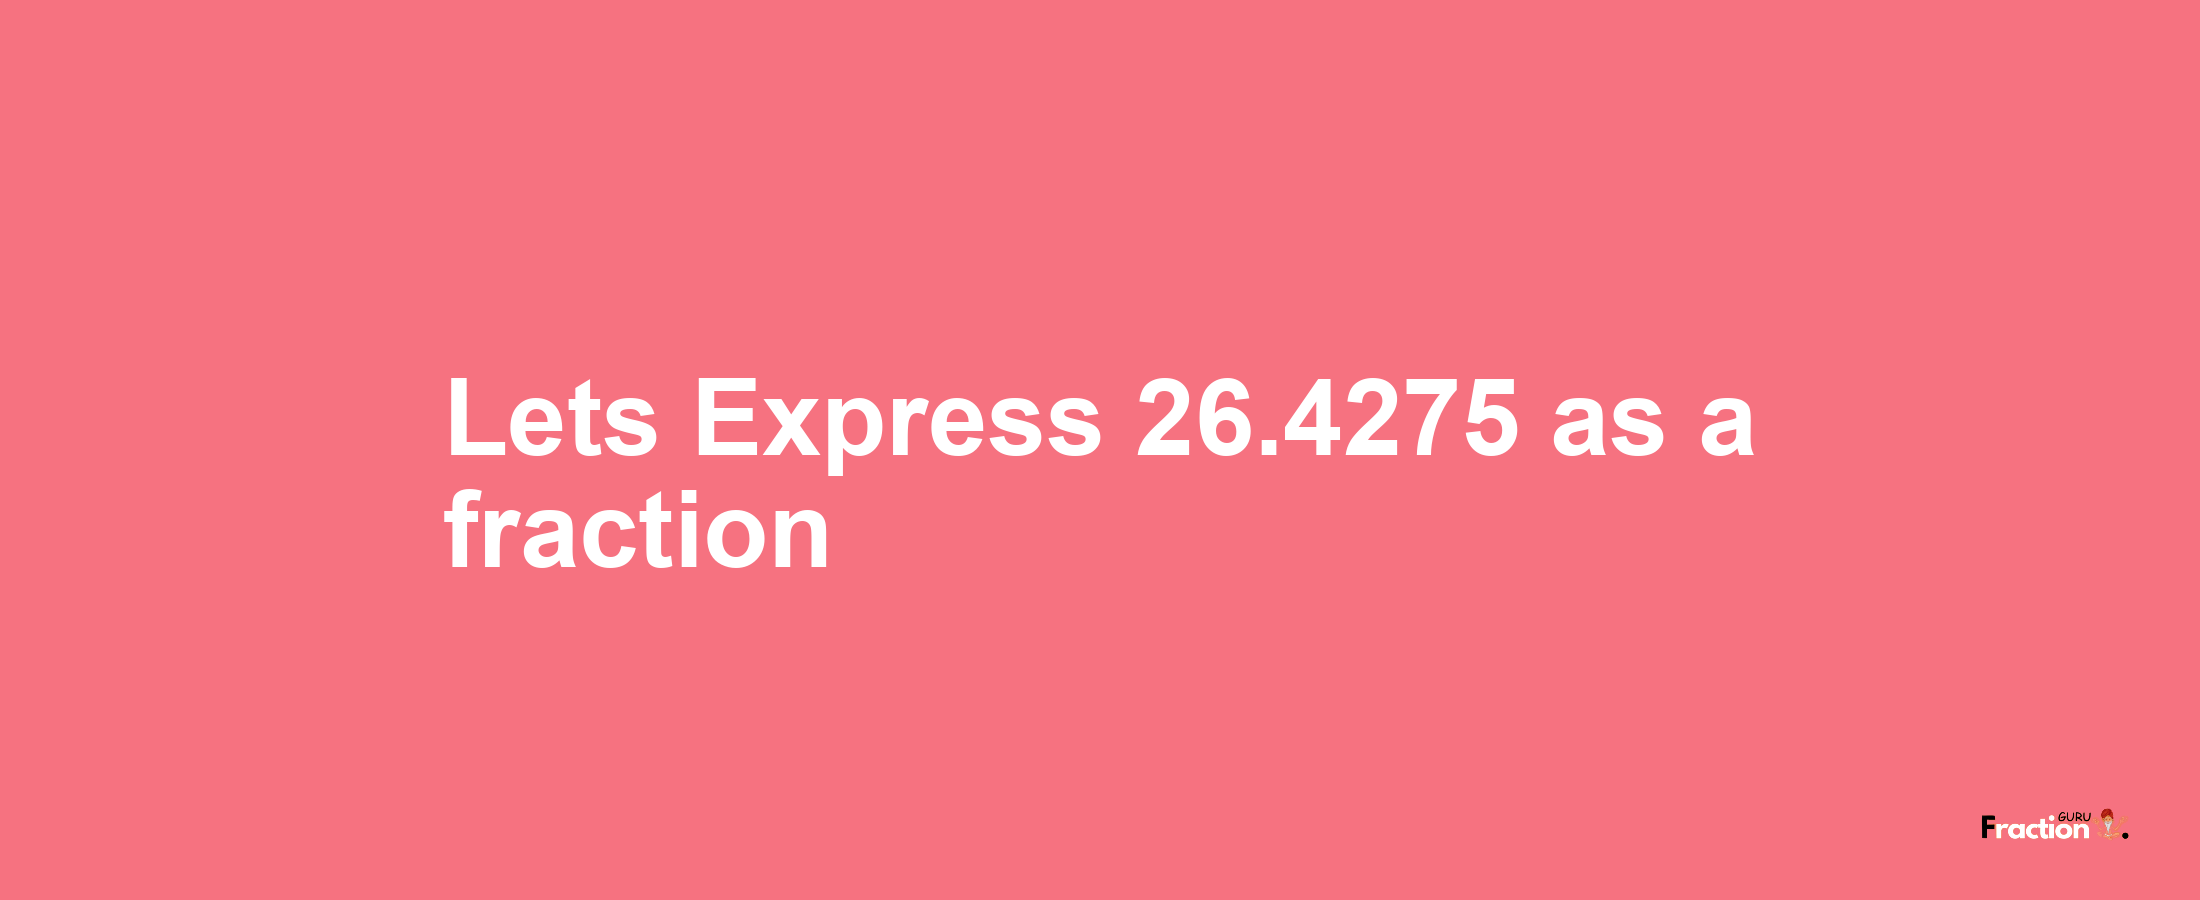 Lets Express 26.4275 as afraction